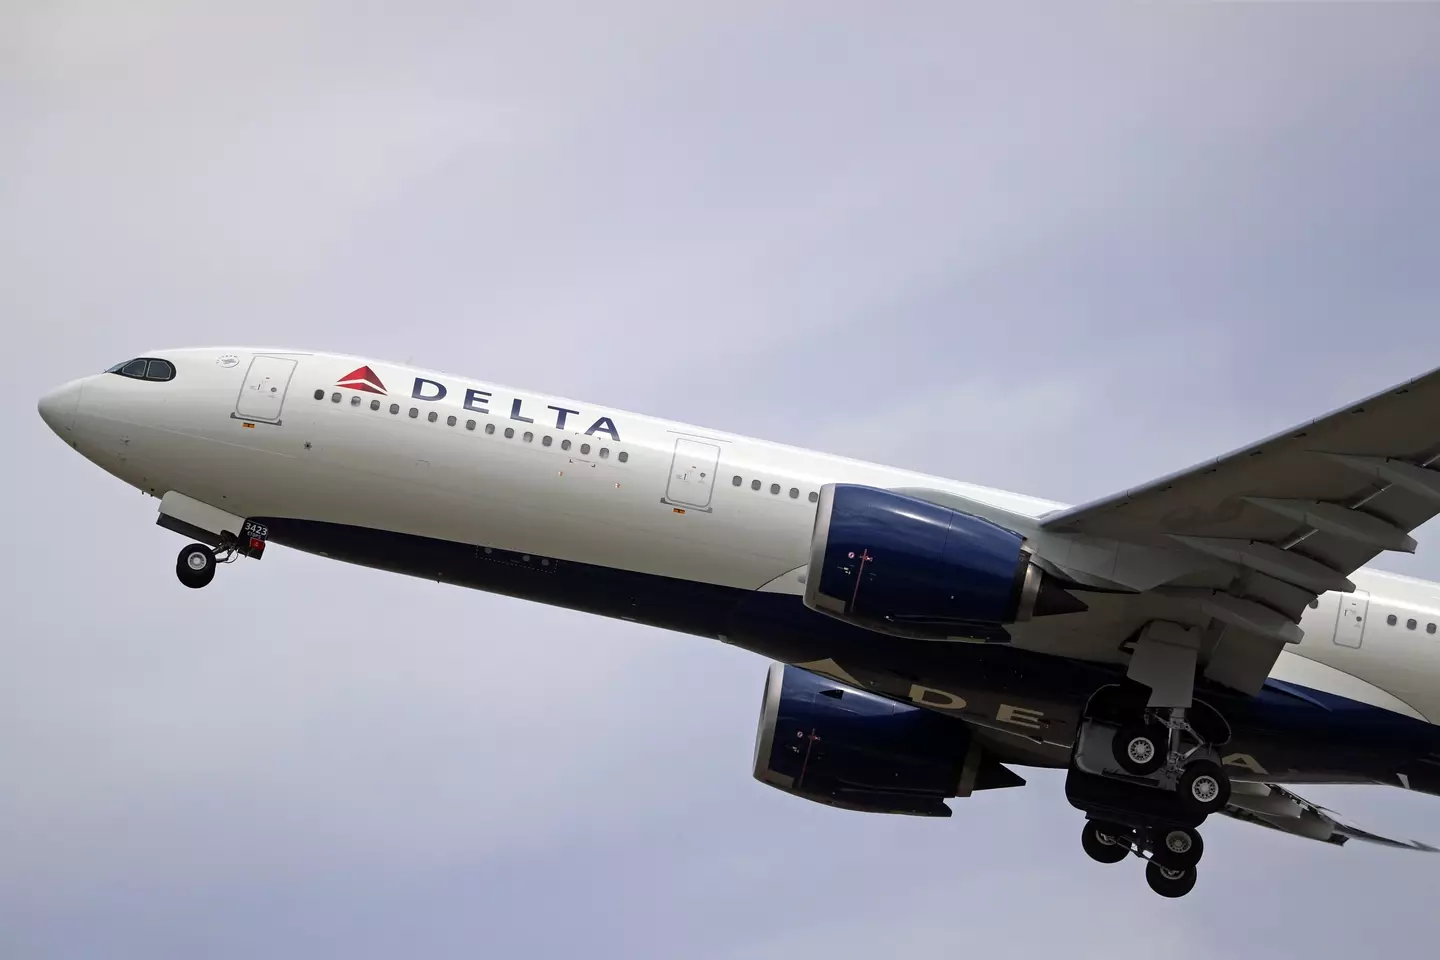 Delta Air Lines Flight 157 was forced to divert due to 'mechanical issue with a backup oxygen system'.